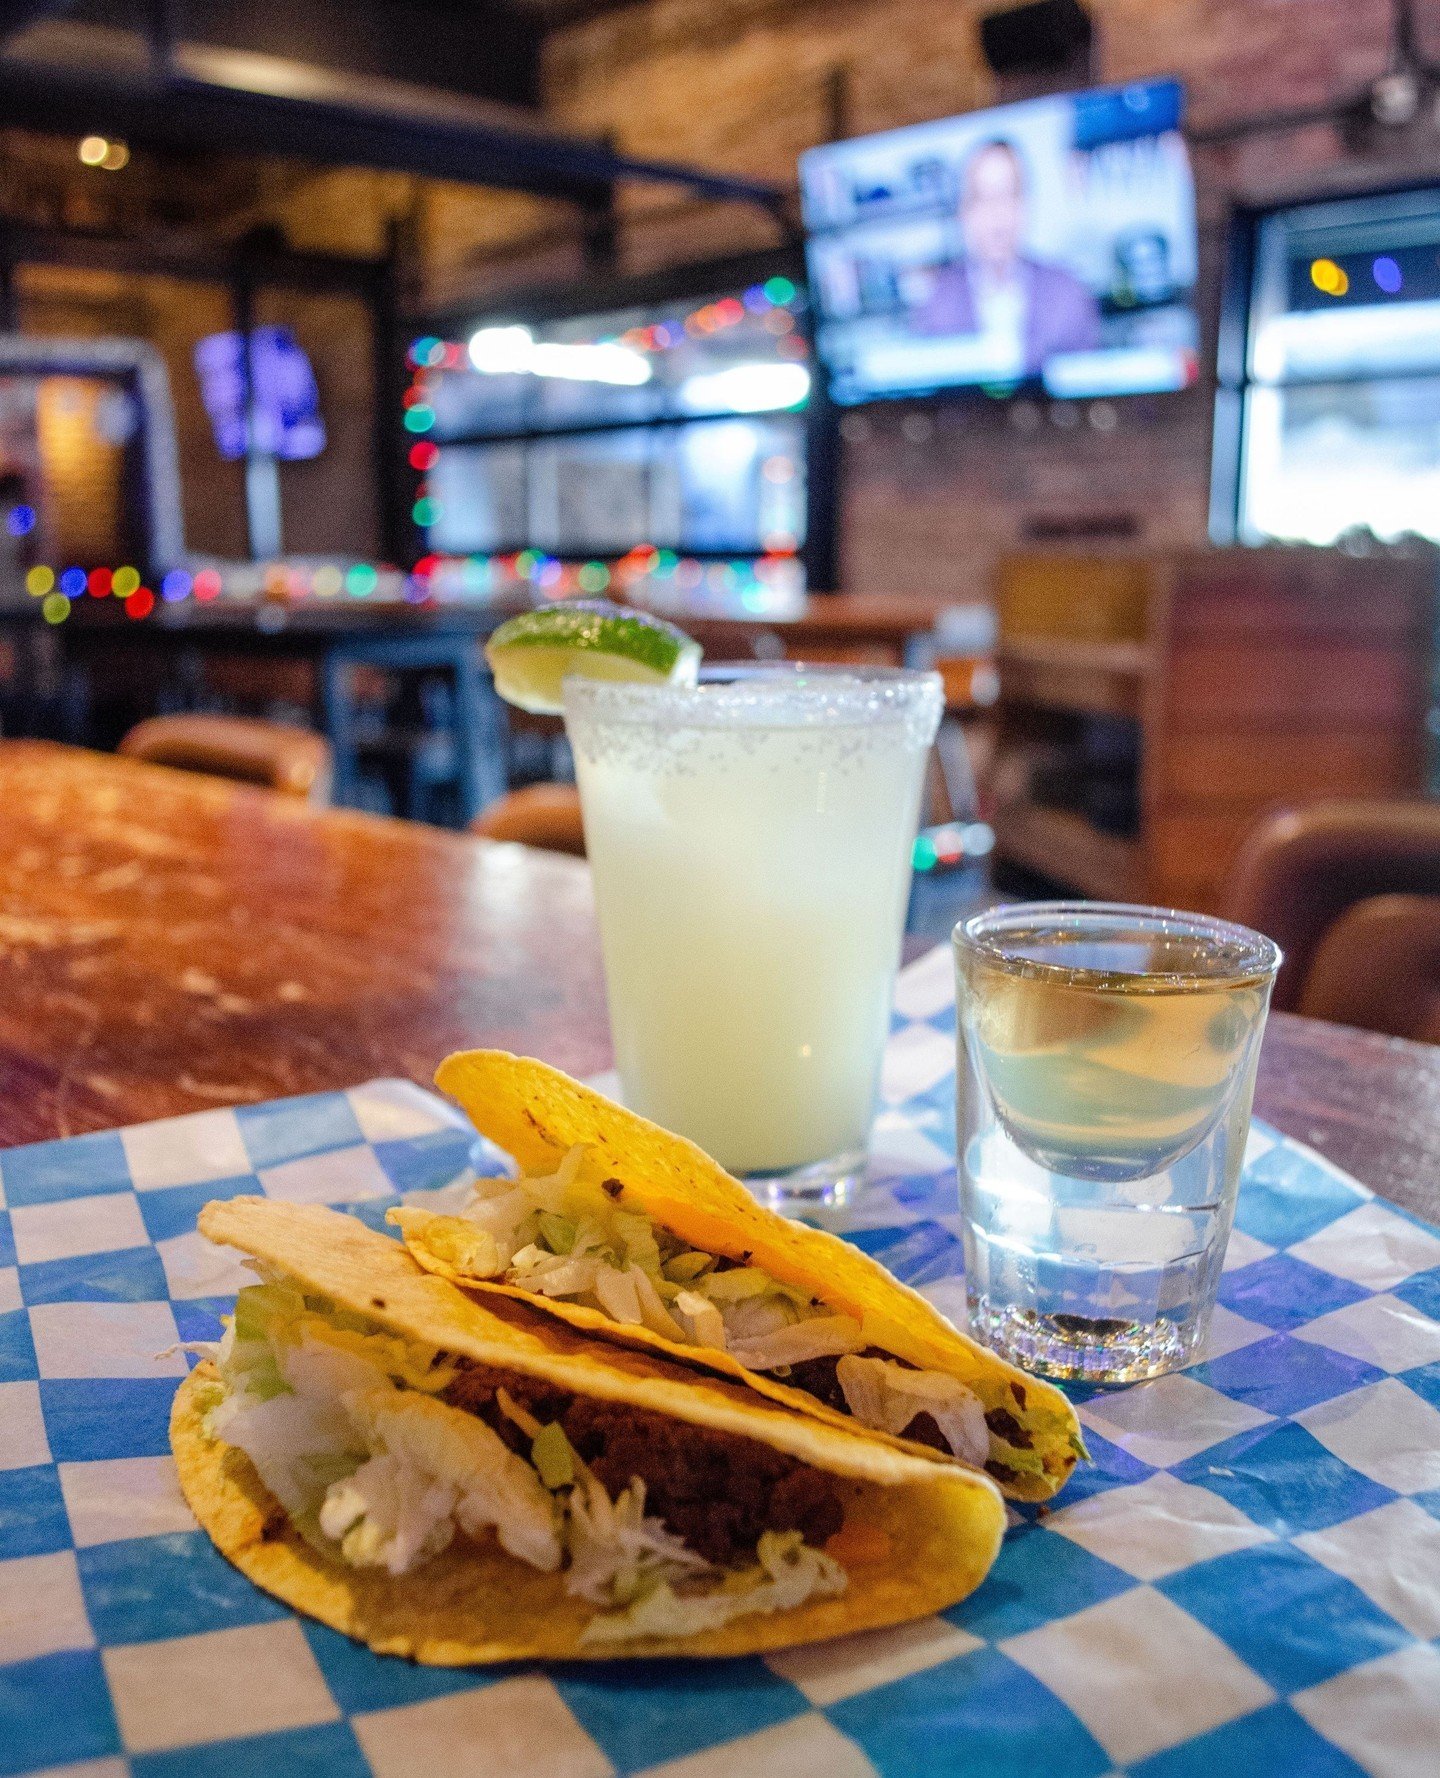 Moonlighter makes Tuesdays better with deals on tequila shots, margaritas and of course, tacos! Taco Tuesdays are always a good time. We open at 5pm and The Sox play at 5:50! The Cubs are on at 6:40! Come on out for the baseball games and stay for th